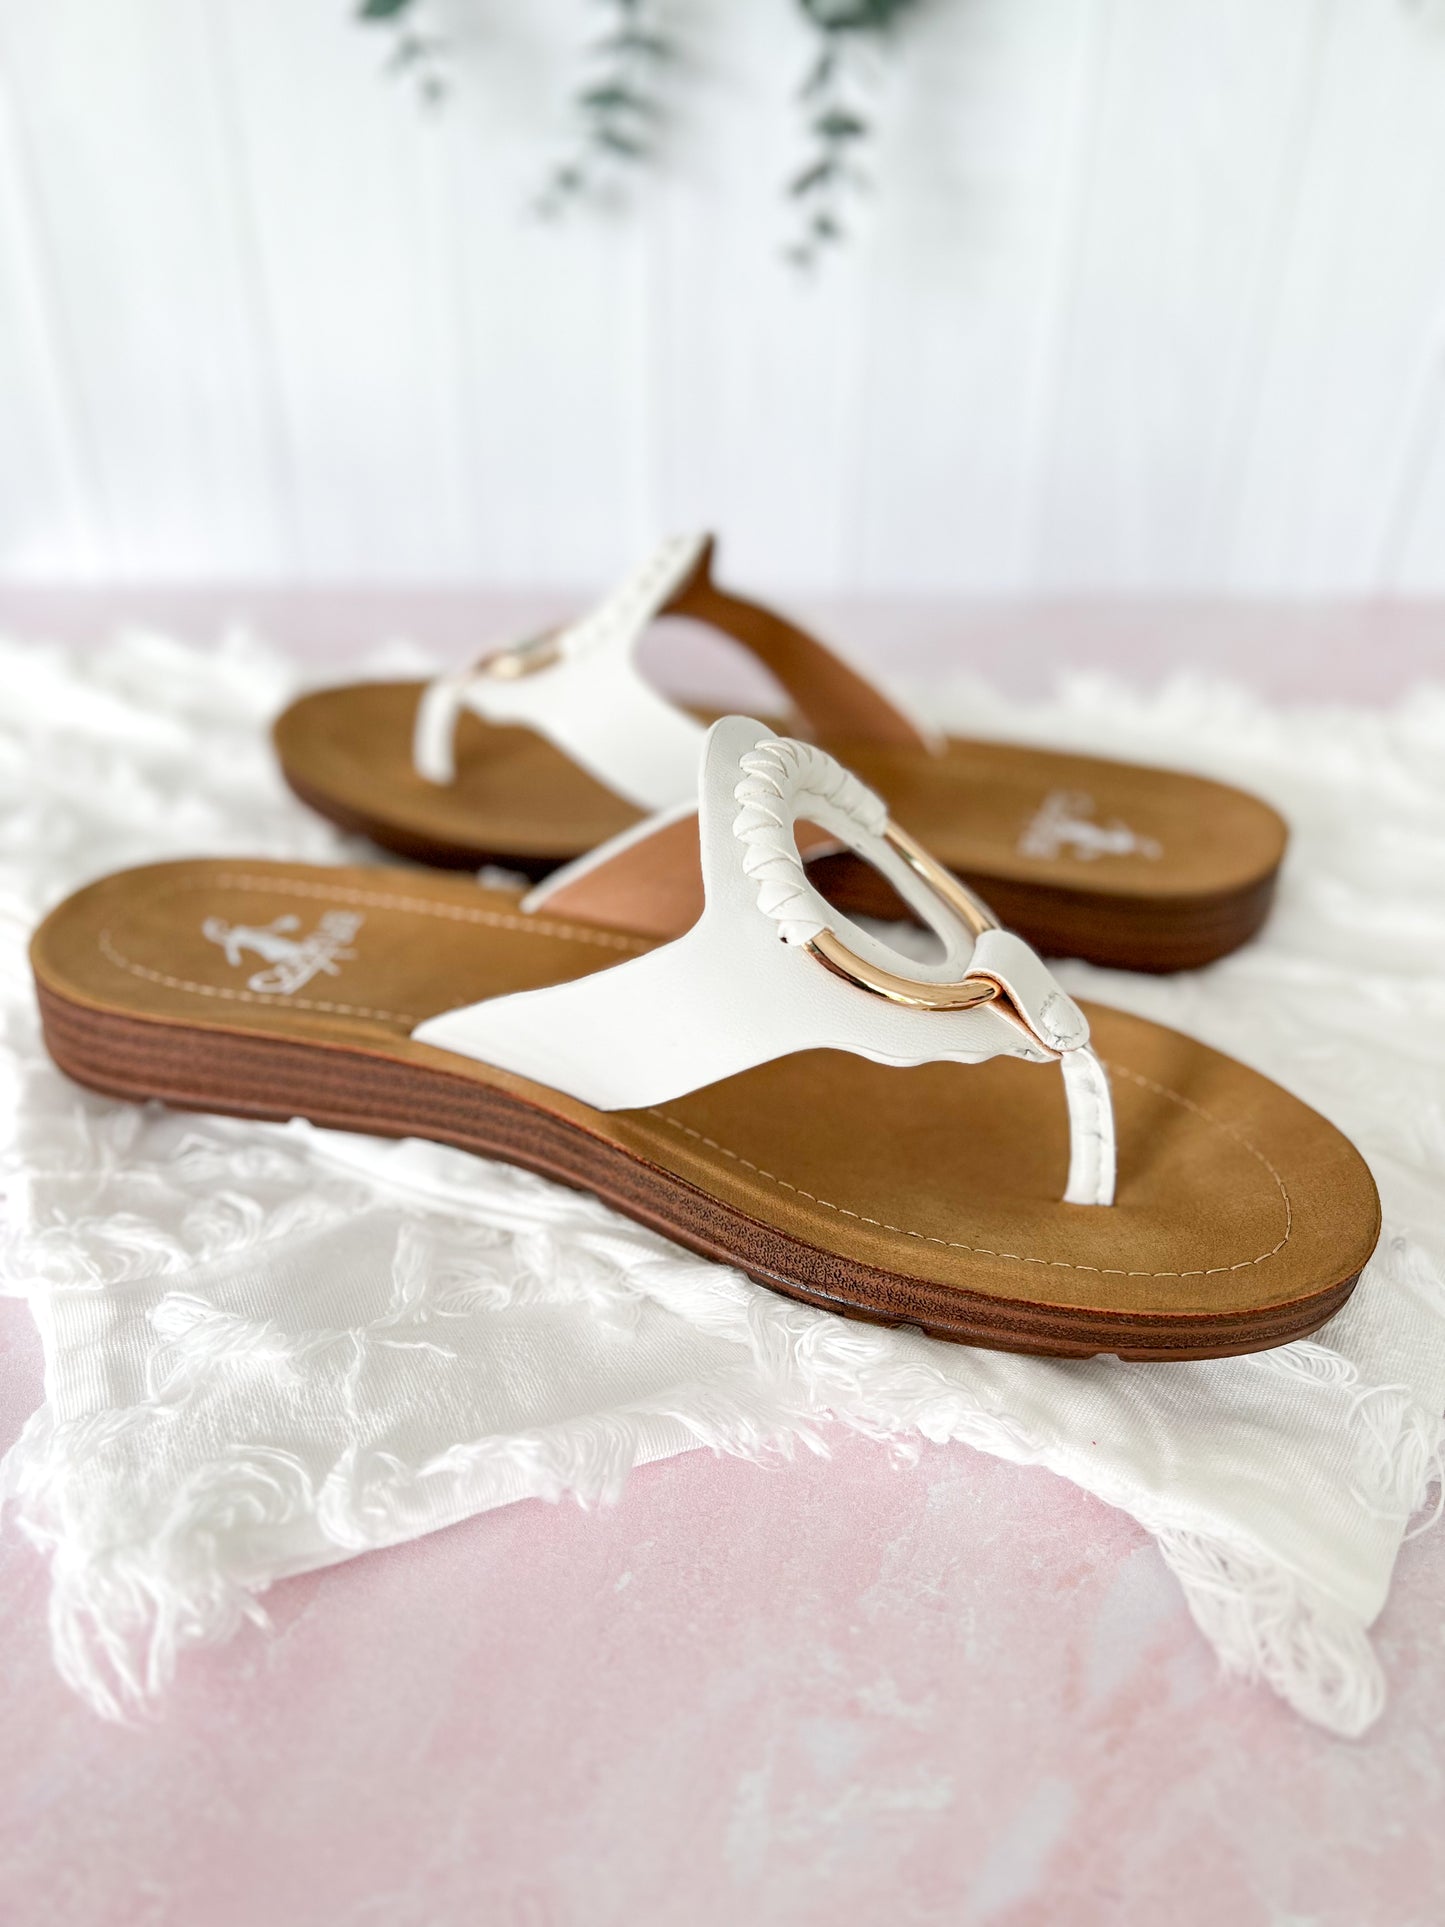 Corky's Ring My Bell Sandal - White - Final Sale